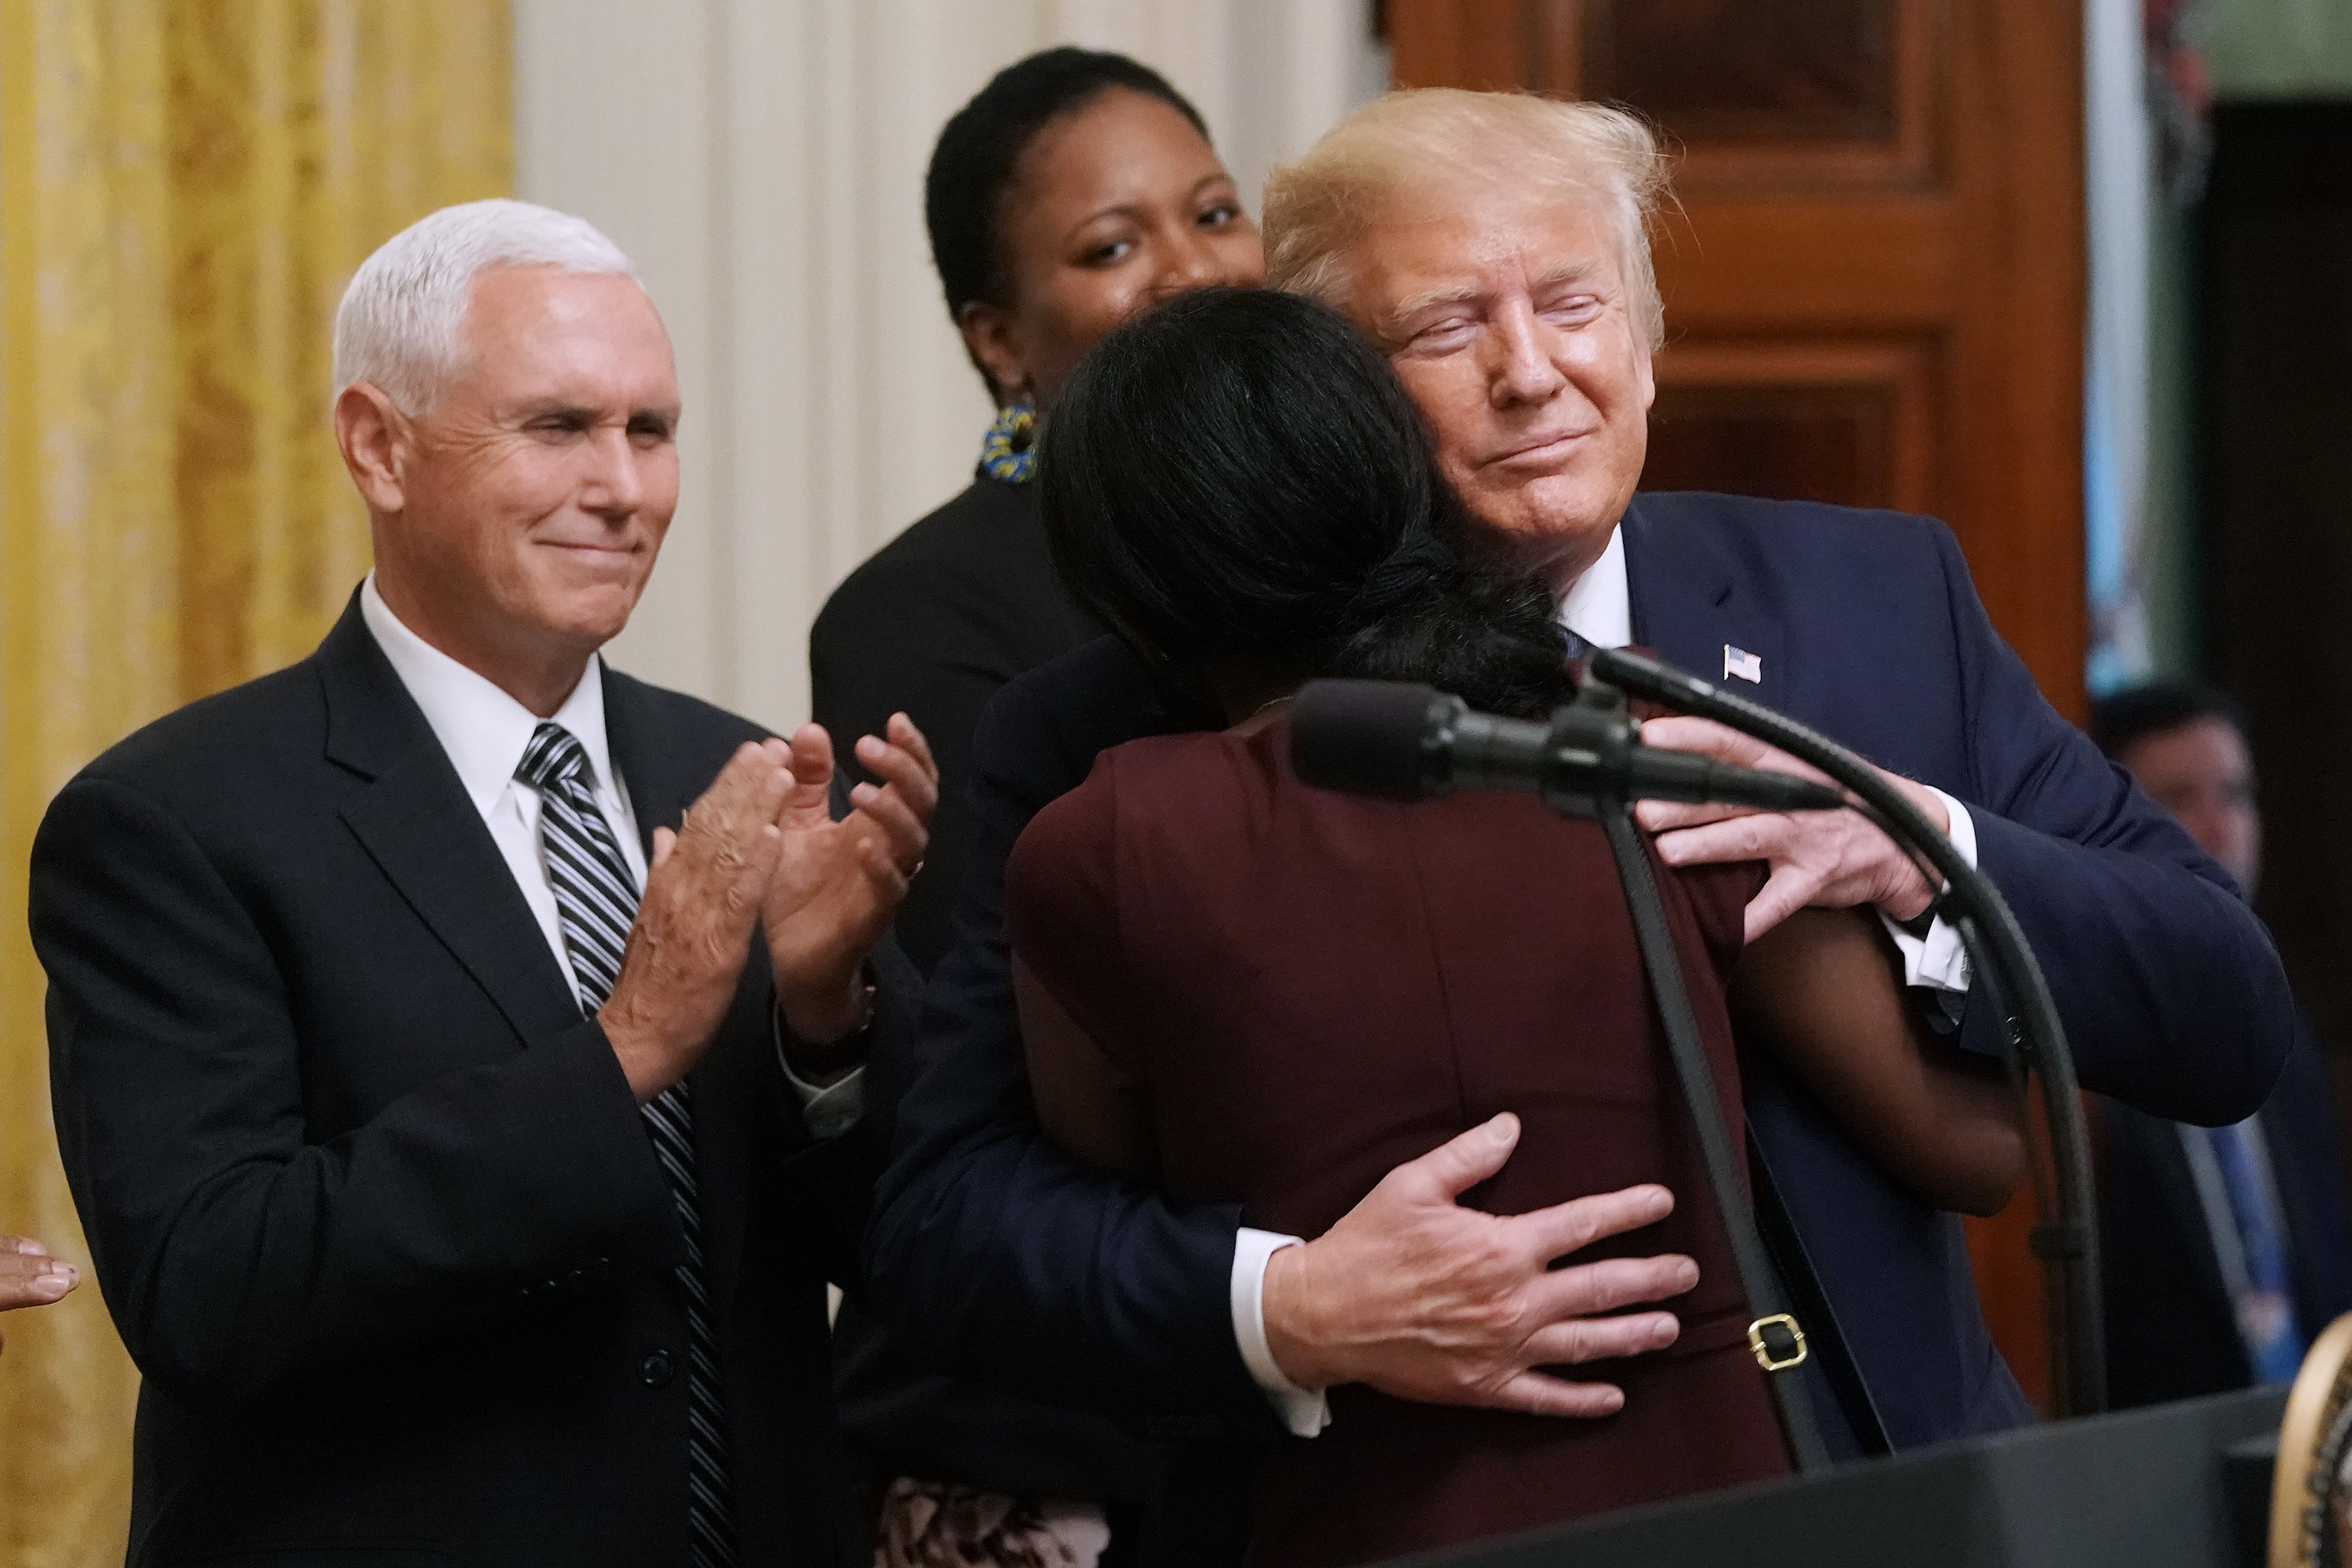 President Donald Trump embraces a woman he invited on stage to pray as Vice President Mike Pence looks on during an event for the Young Black Leadership Summit in the East Room of the White House October 04, 2019 in Washington, DC. Organized by the conservative nonprofit political group Turning Points USA, the summit bills itself as a professional development, leadership training and networking opportunity. Chip Somodevilla/Getty Images